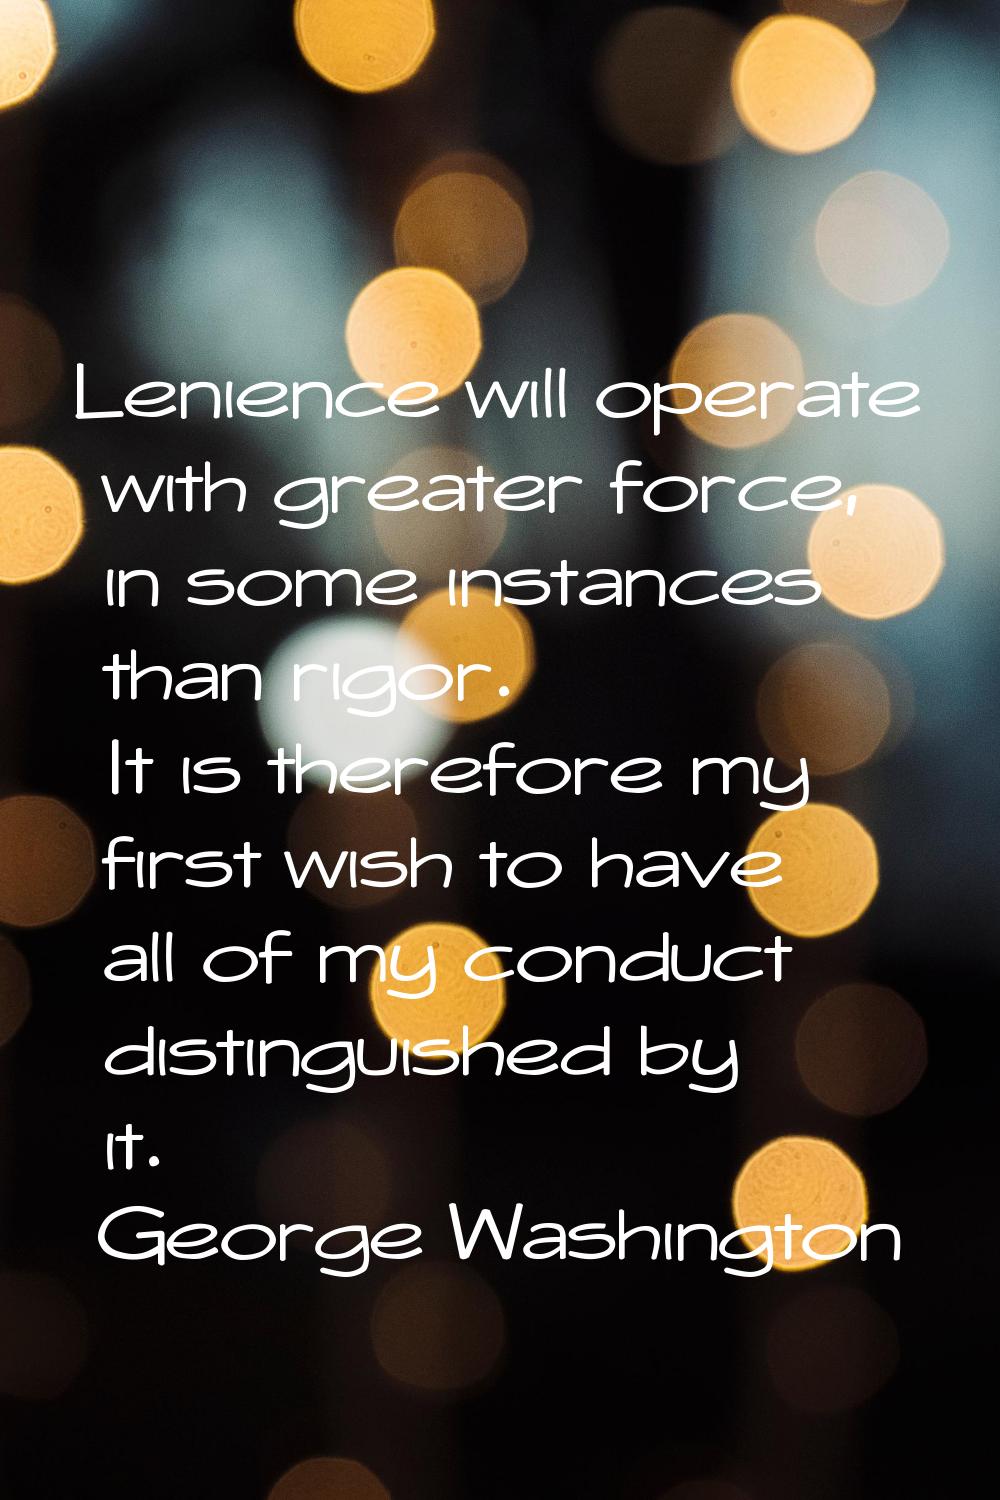 Lenience will operate with greater force, in some instances than rigor. It is therefore my first wi